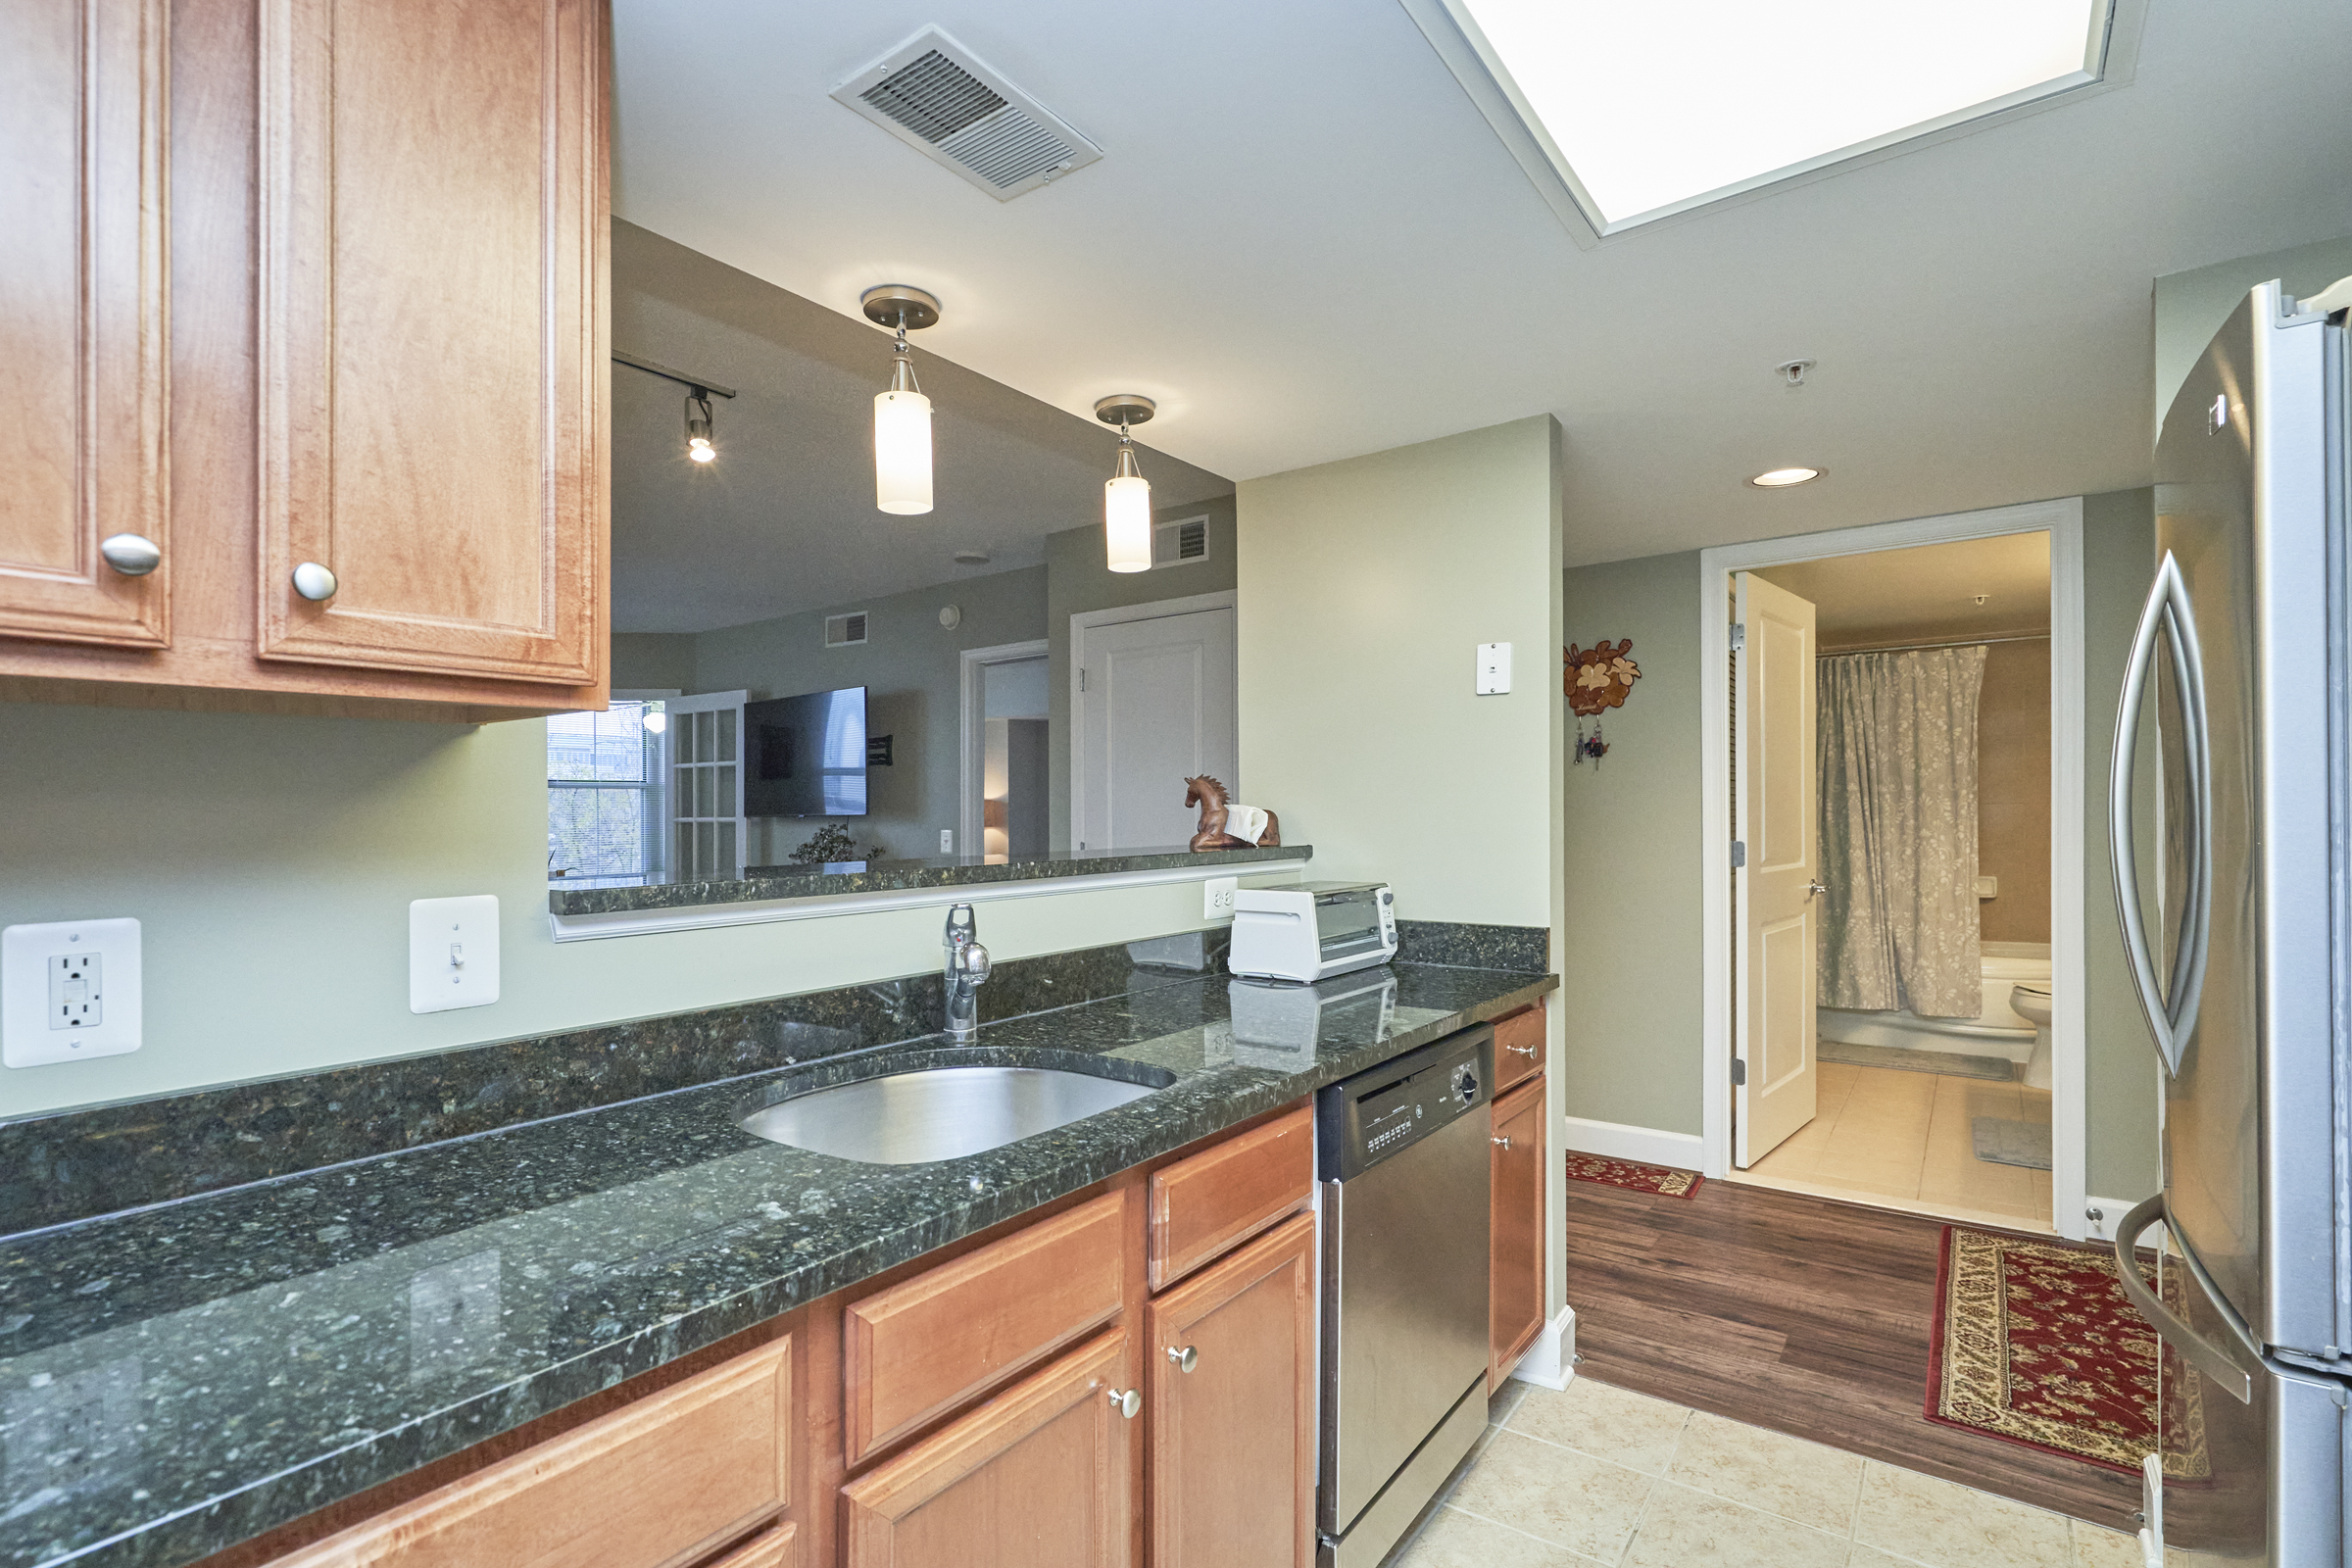 Interior professional photo of 11800 Sunset Hills Road Unit #811, showing the kitchen from the perspective of looking out to the hall or through the picture window to the living area